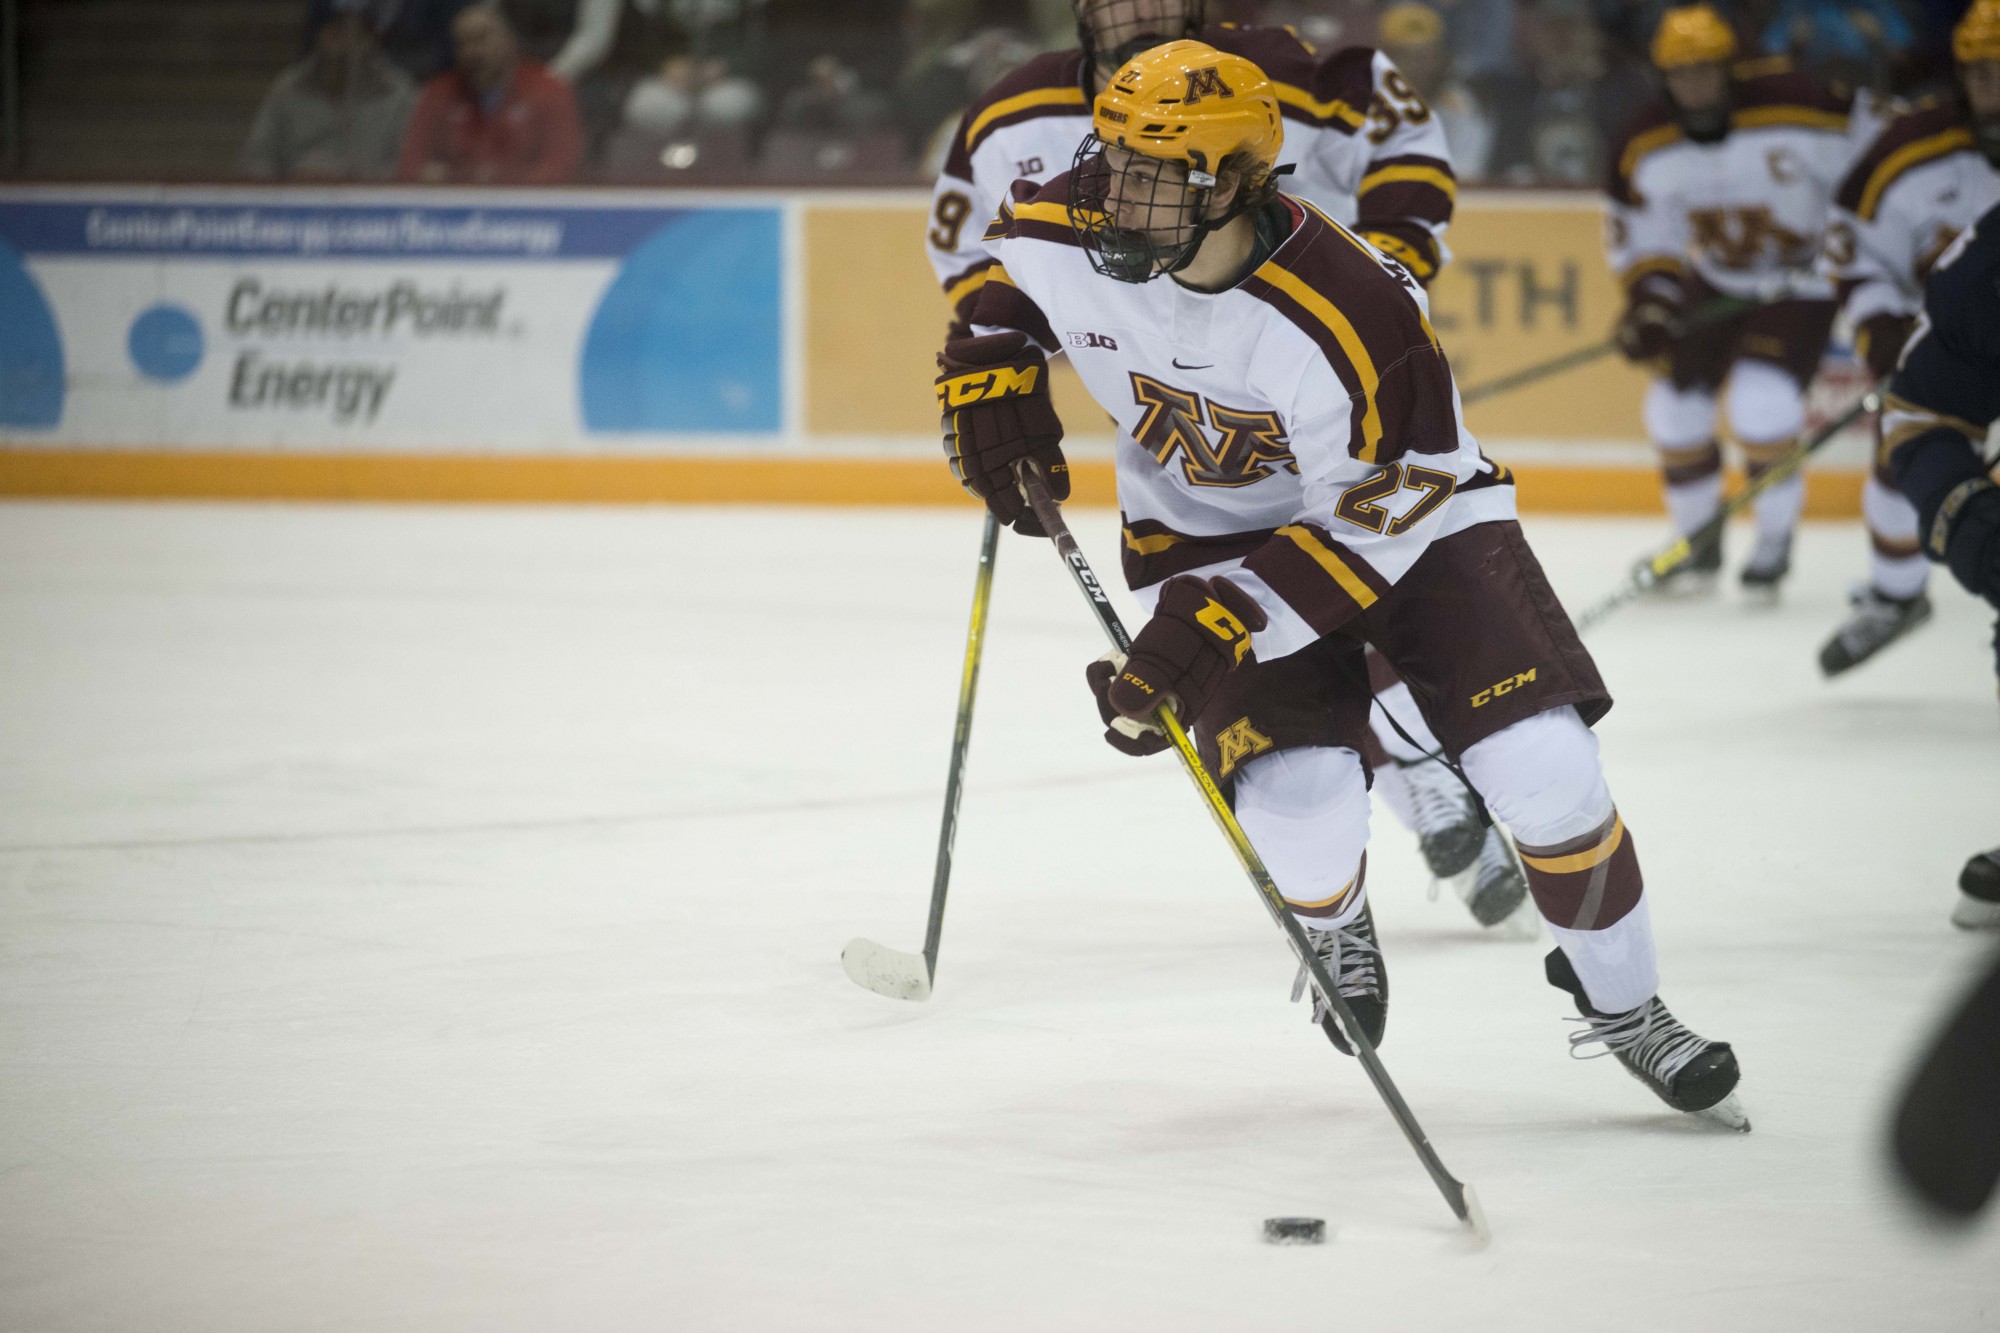 Forward Blake McLaughlin skates with the puck during the game against the Notre Dame Fighting Irish at 3M Arena at Mariucci on Friday, Nov. 1, 2019. The Gophers won 3-2 in double overtime.